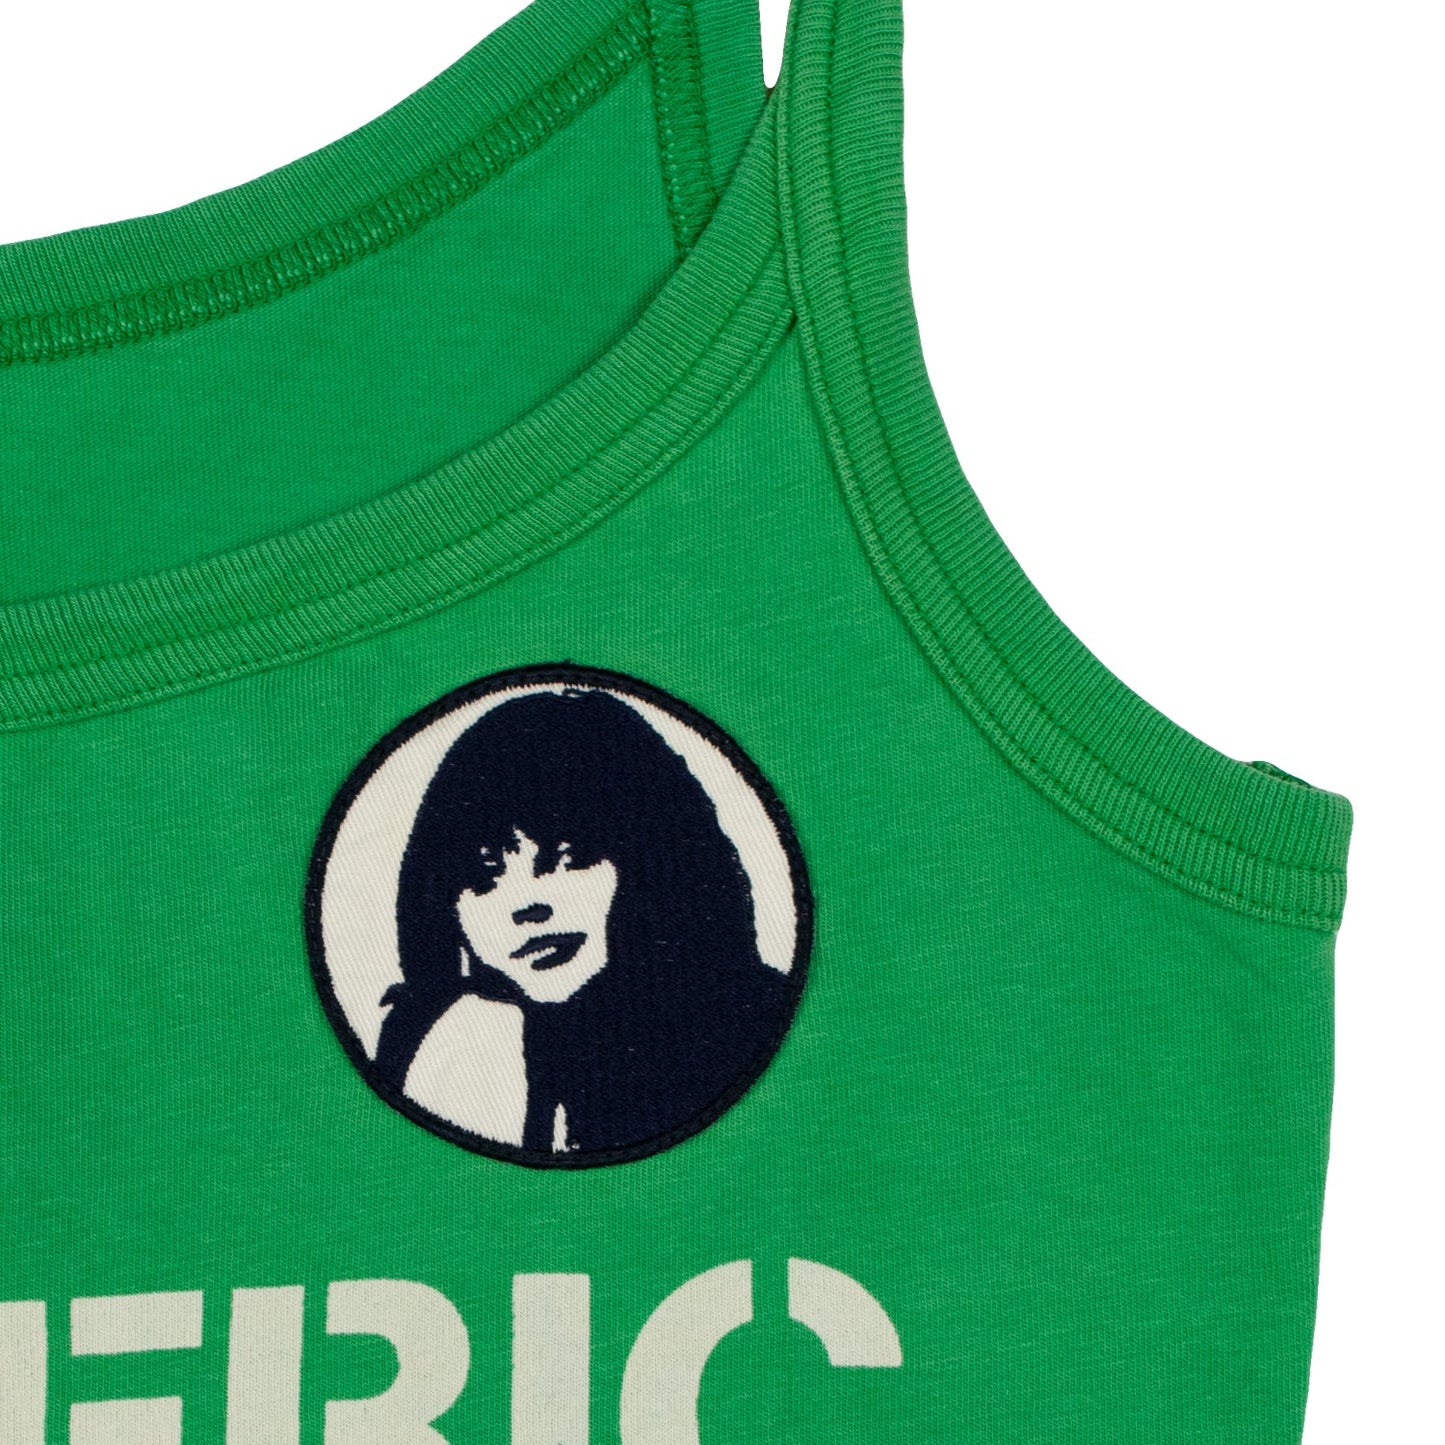 Hysteric Glamour Hysteric 84 Patchwork Tank Top